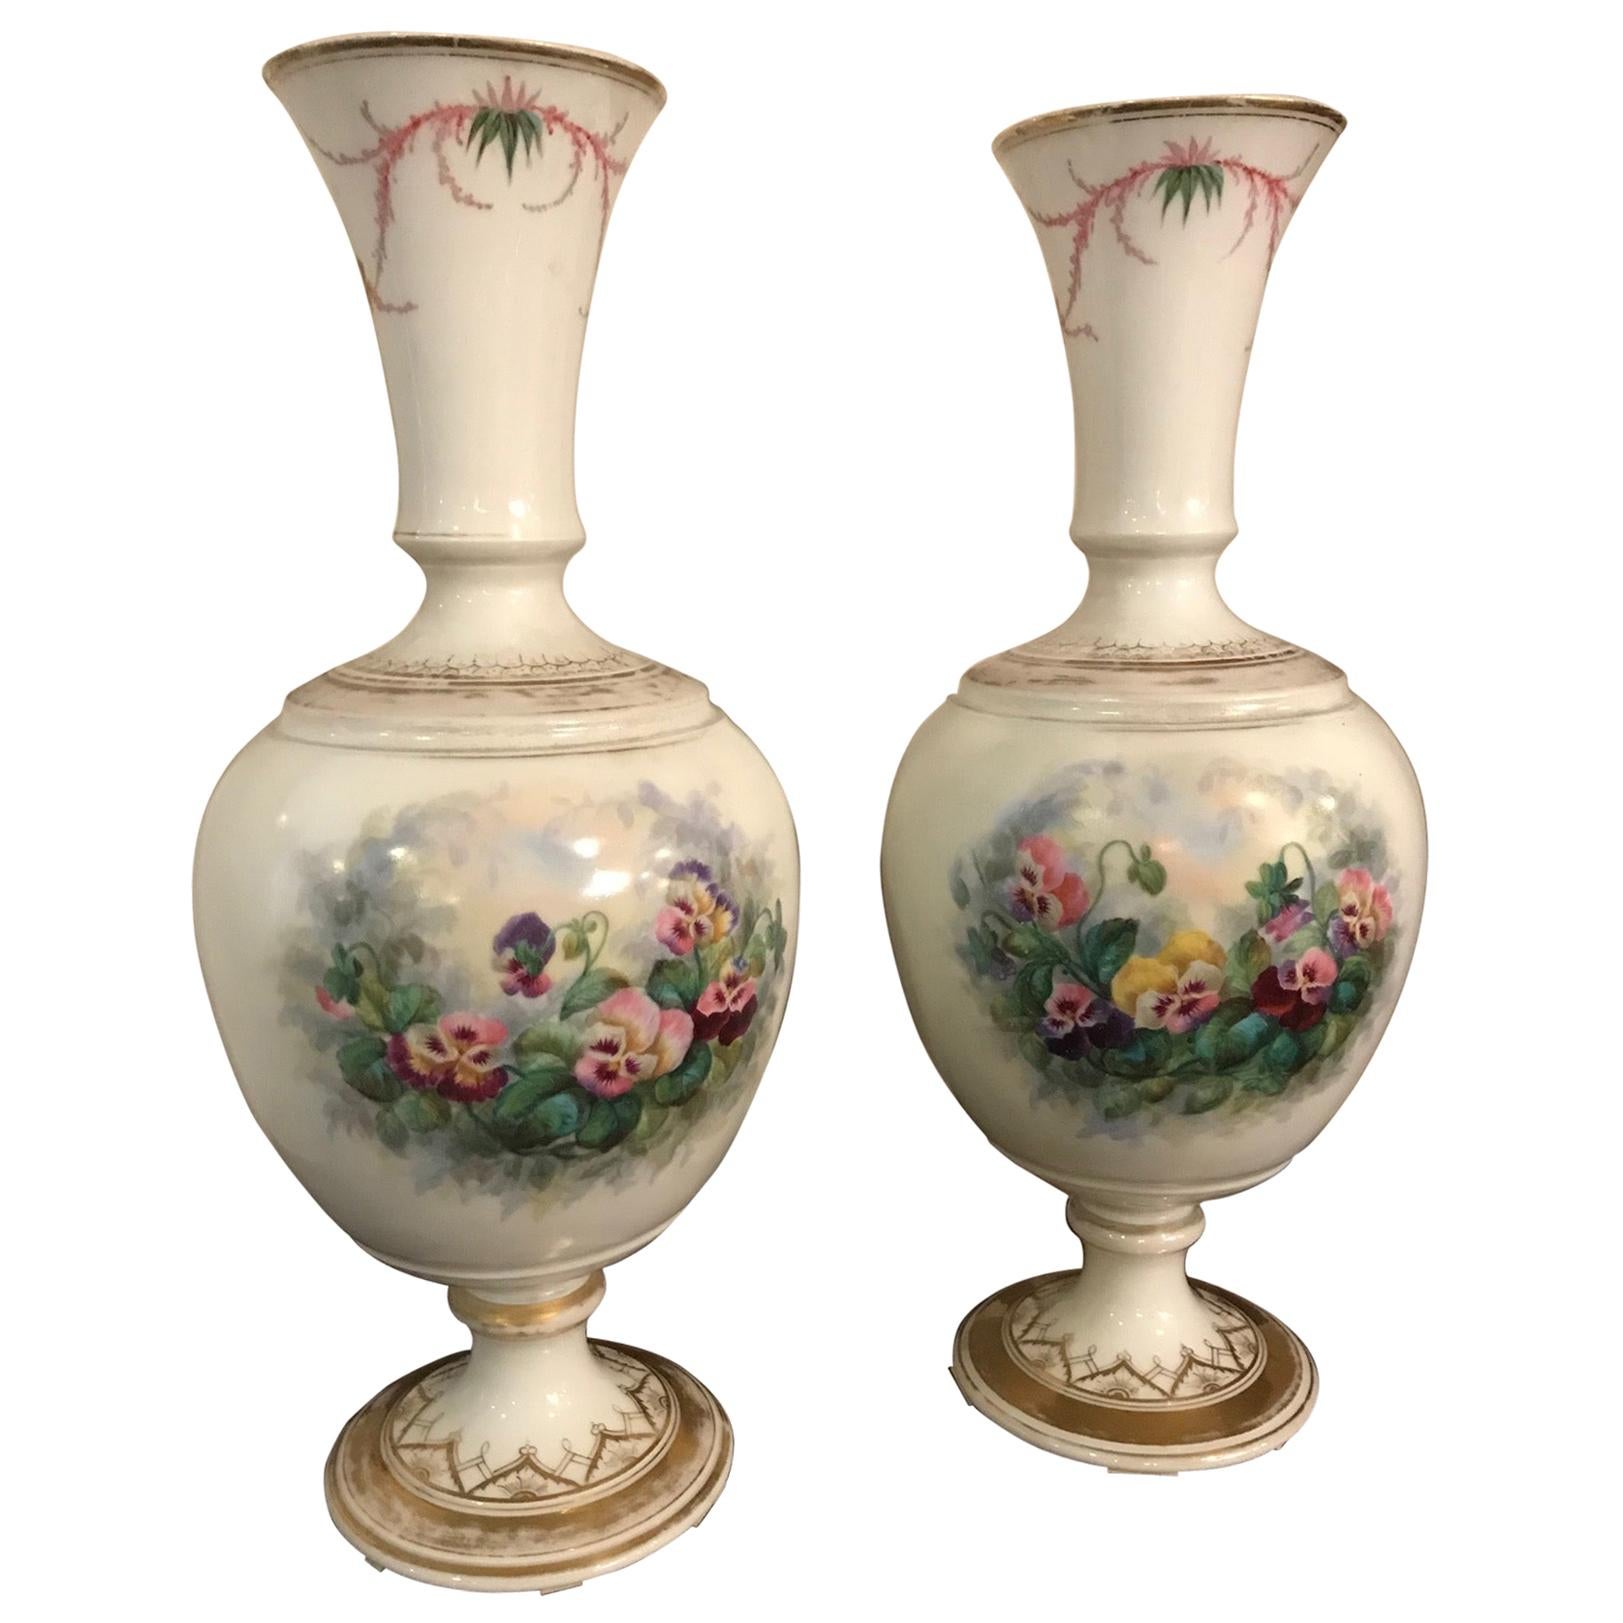 19th Century French Flowers Decoration Pair of Vases, 1850s